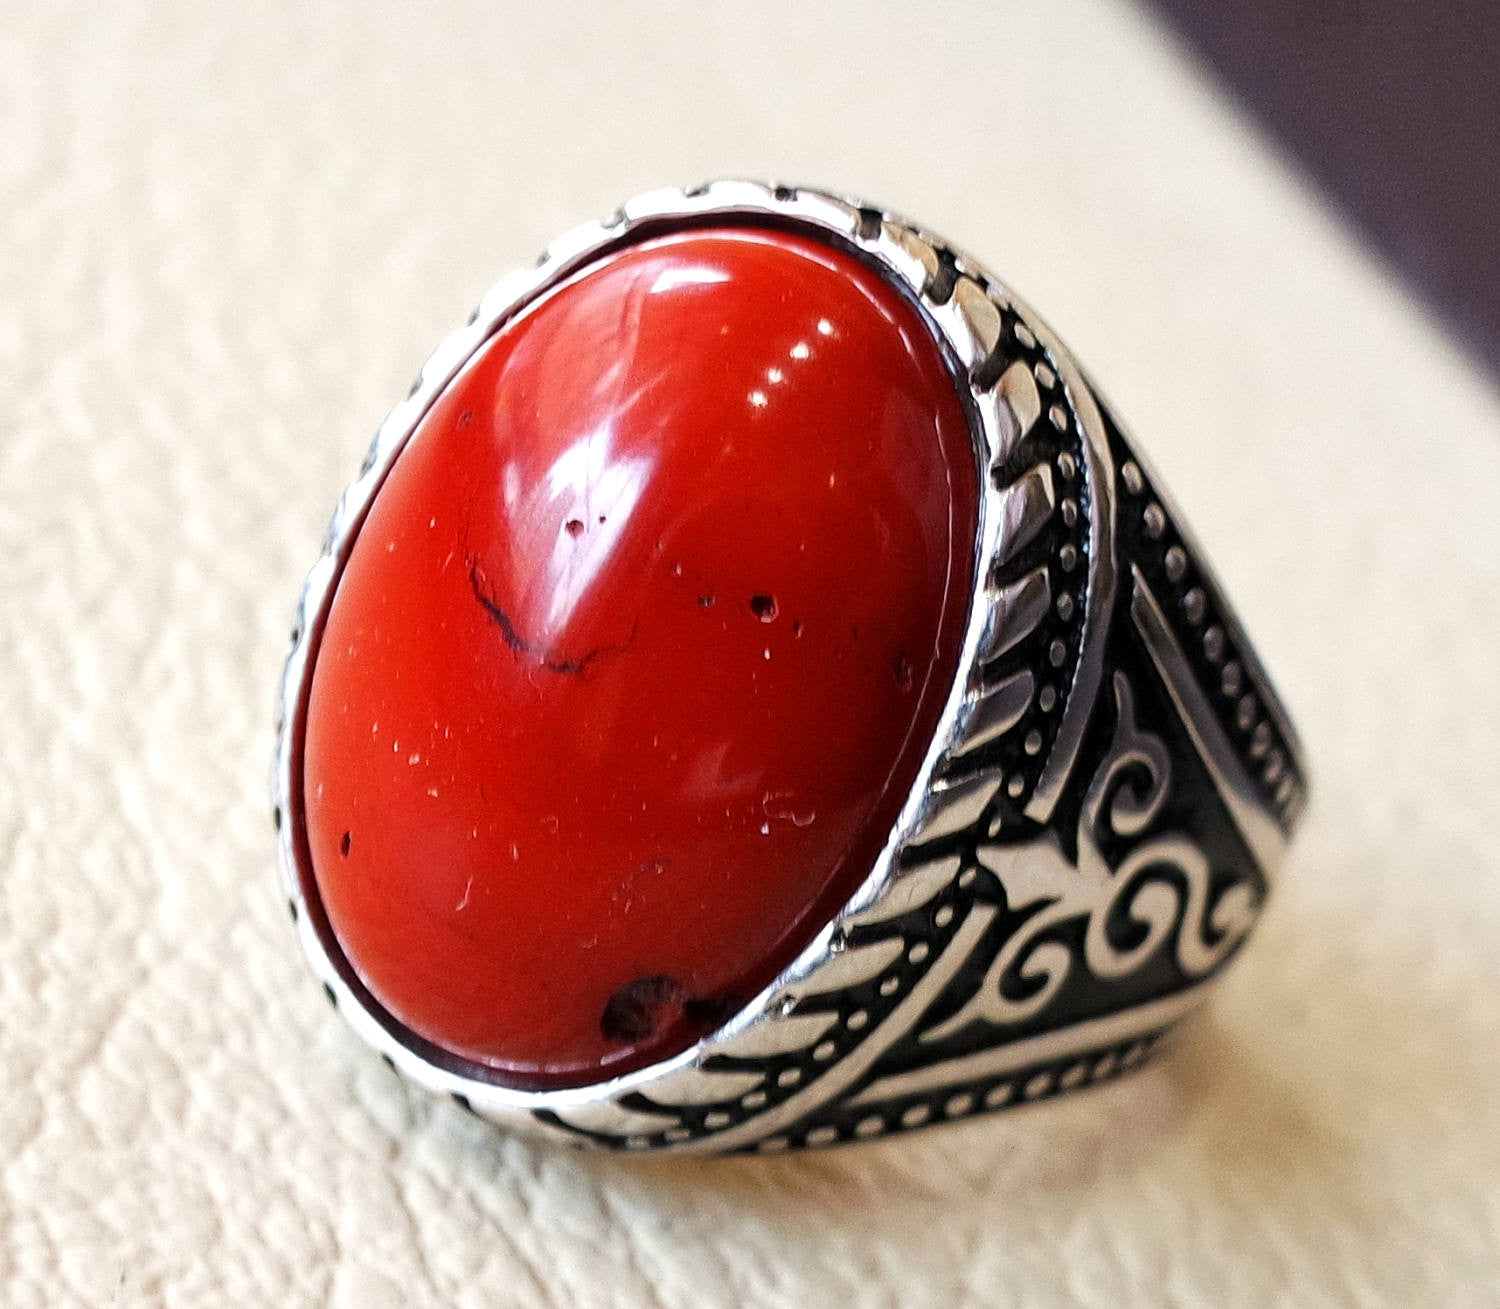 red jasper man ring stone natural aqeeq gem sterling silver 925 man ring oval semi precious cabochon jewelry fast shipping all sizes